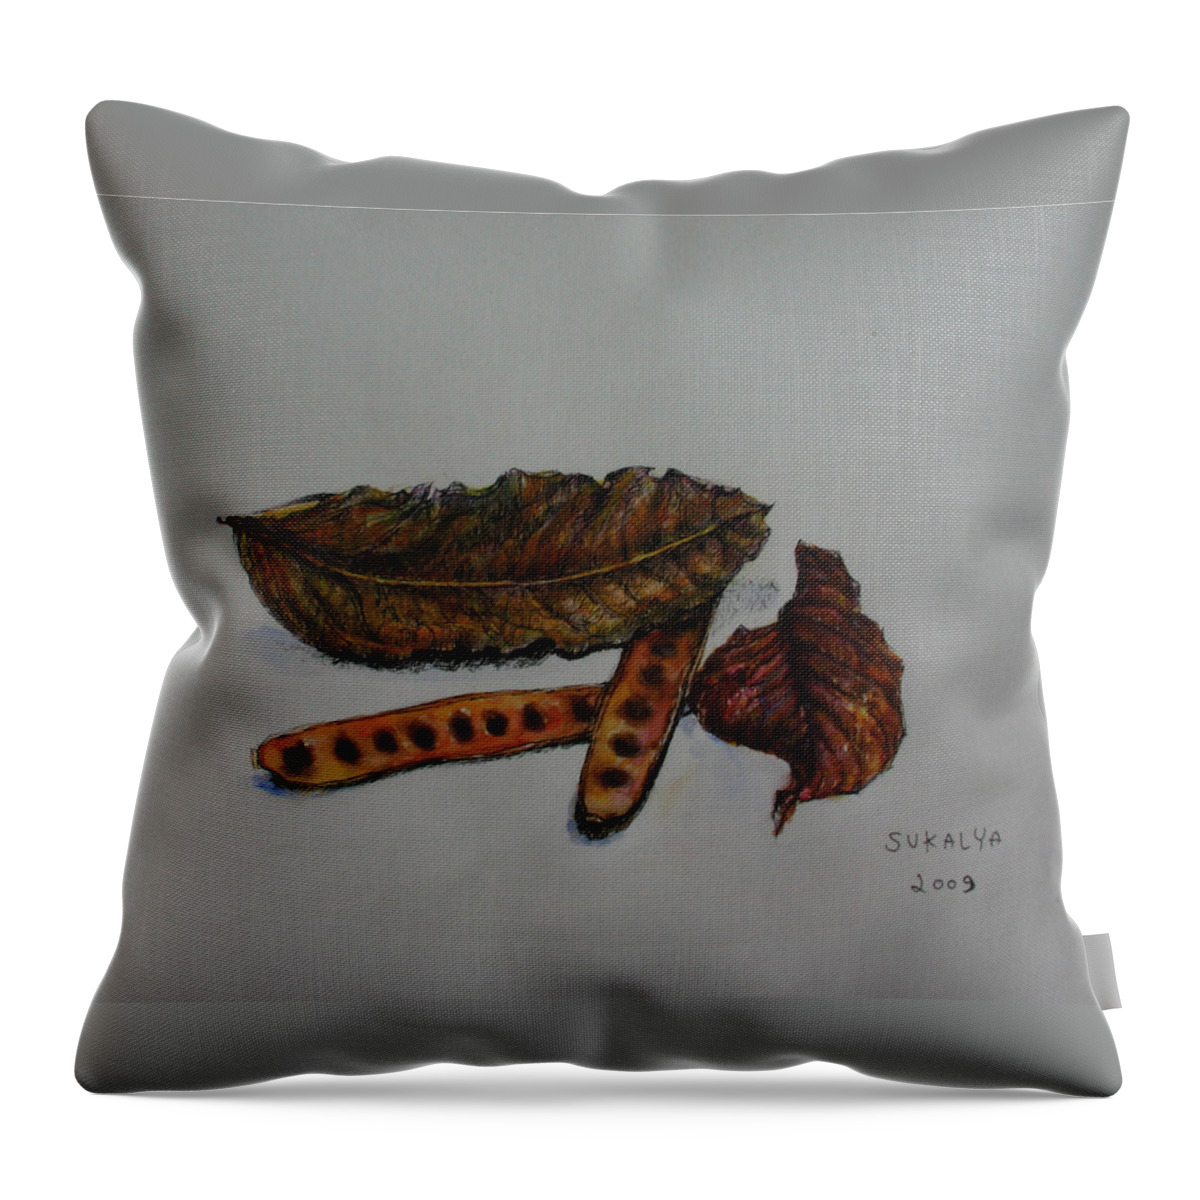 Brown Throw Pillow featuring the painting Brown of Leafs and Seeds by Sukalya Chearanantana